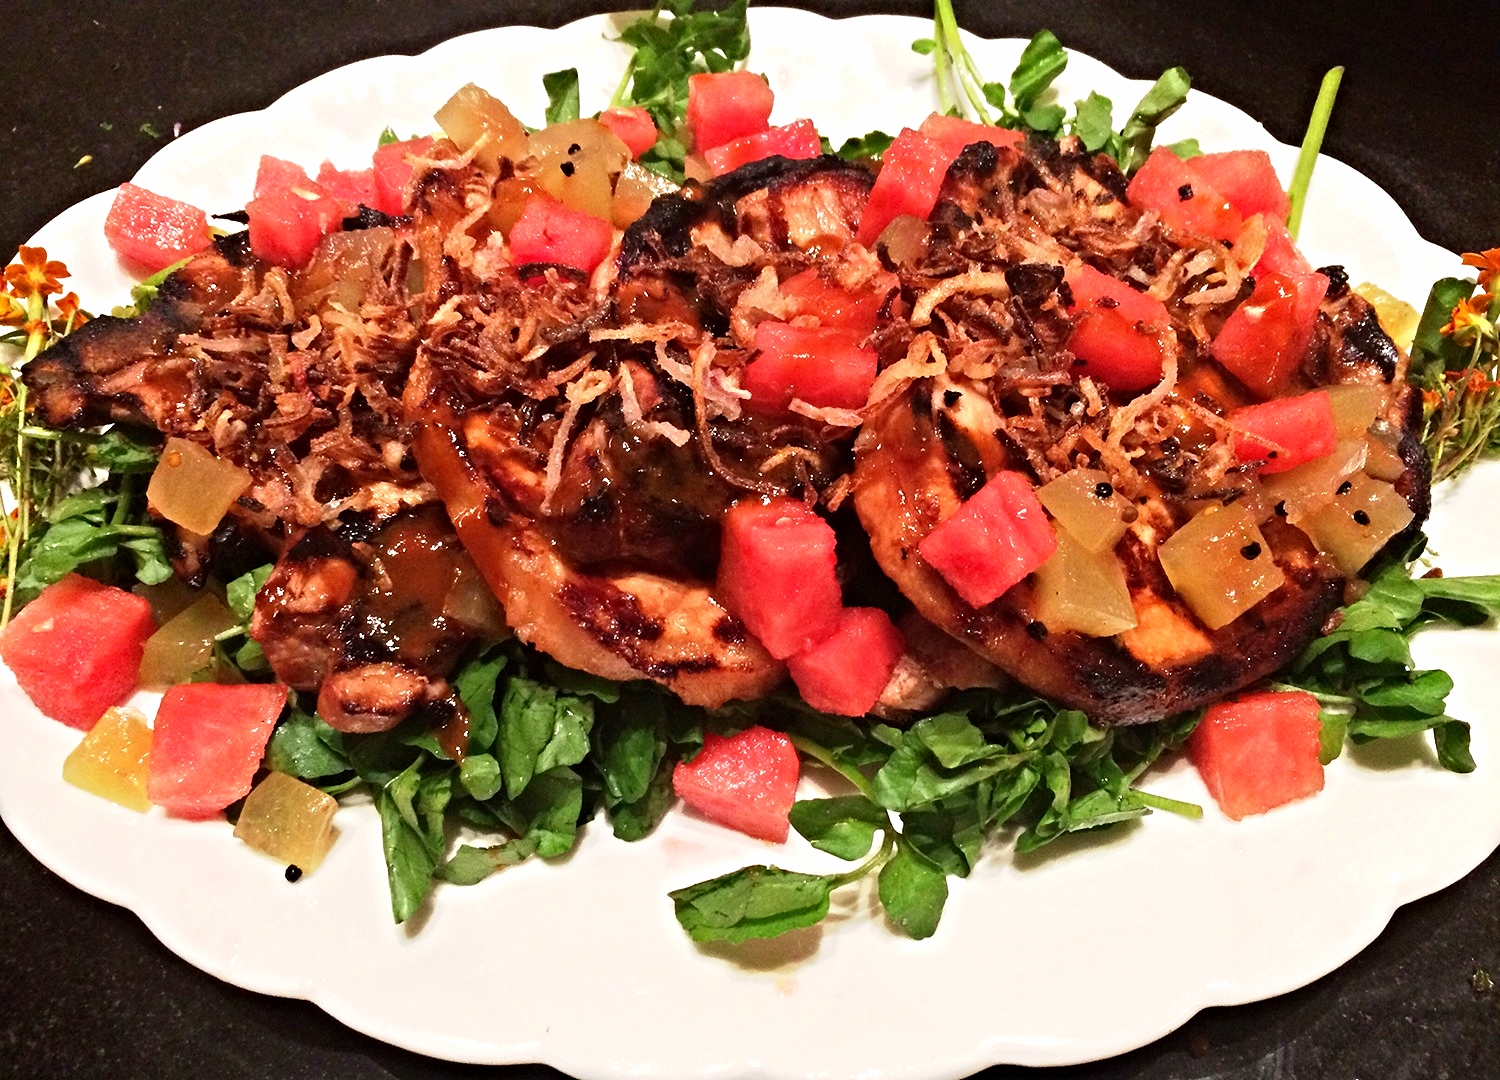 Vietnamese marinated porkchops on watercress with watermelon, pickled watermelon rind, crisped shallots and black sesame